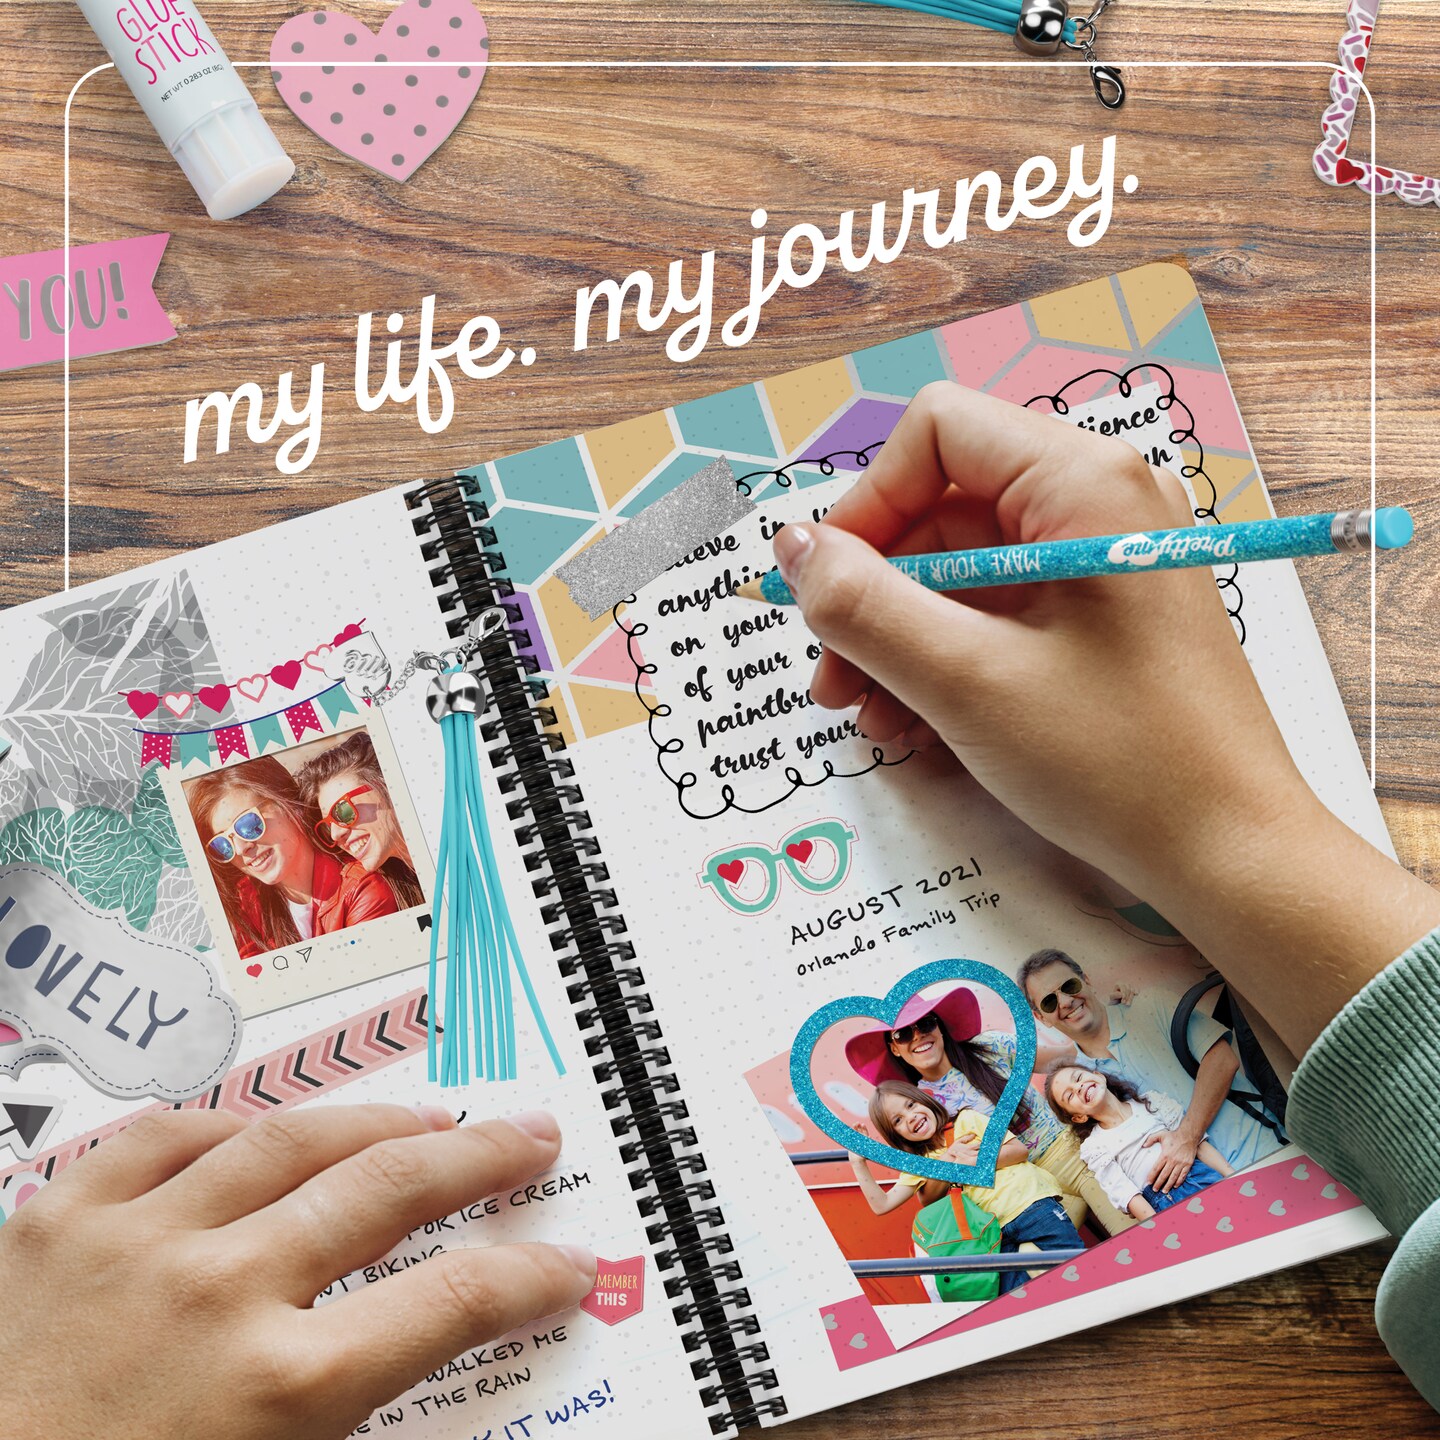 Pretty Me DIY Journal Kit for Girls - Great Gift for 8-14 Year Old Girl - Cool Birthday Gifts Ideas for Teens - Fun, Cute Art &#x26; Crafts Kits for Tween Teenage Kids - Scrapbook &#x26; Diary Supplies Toy Set